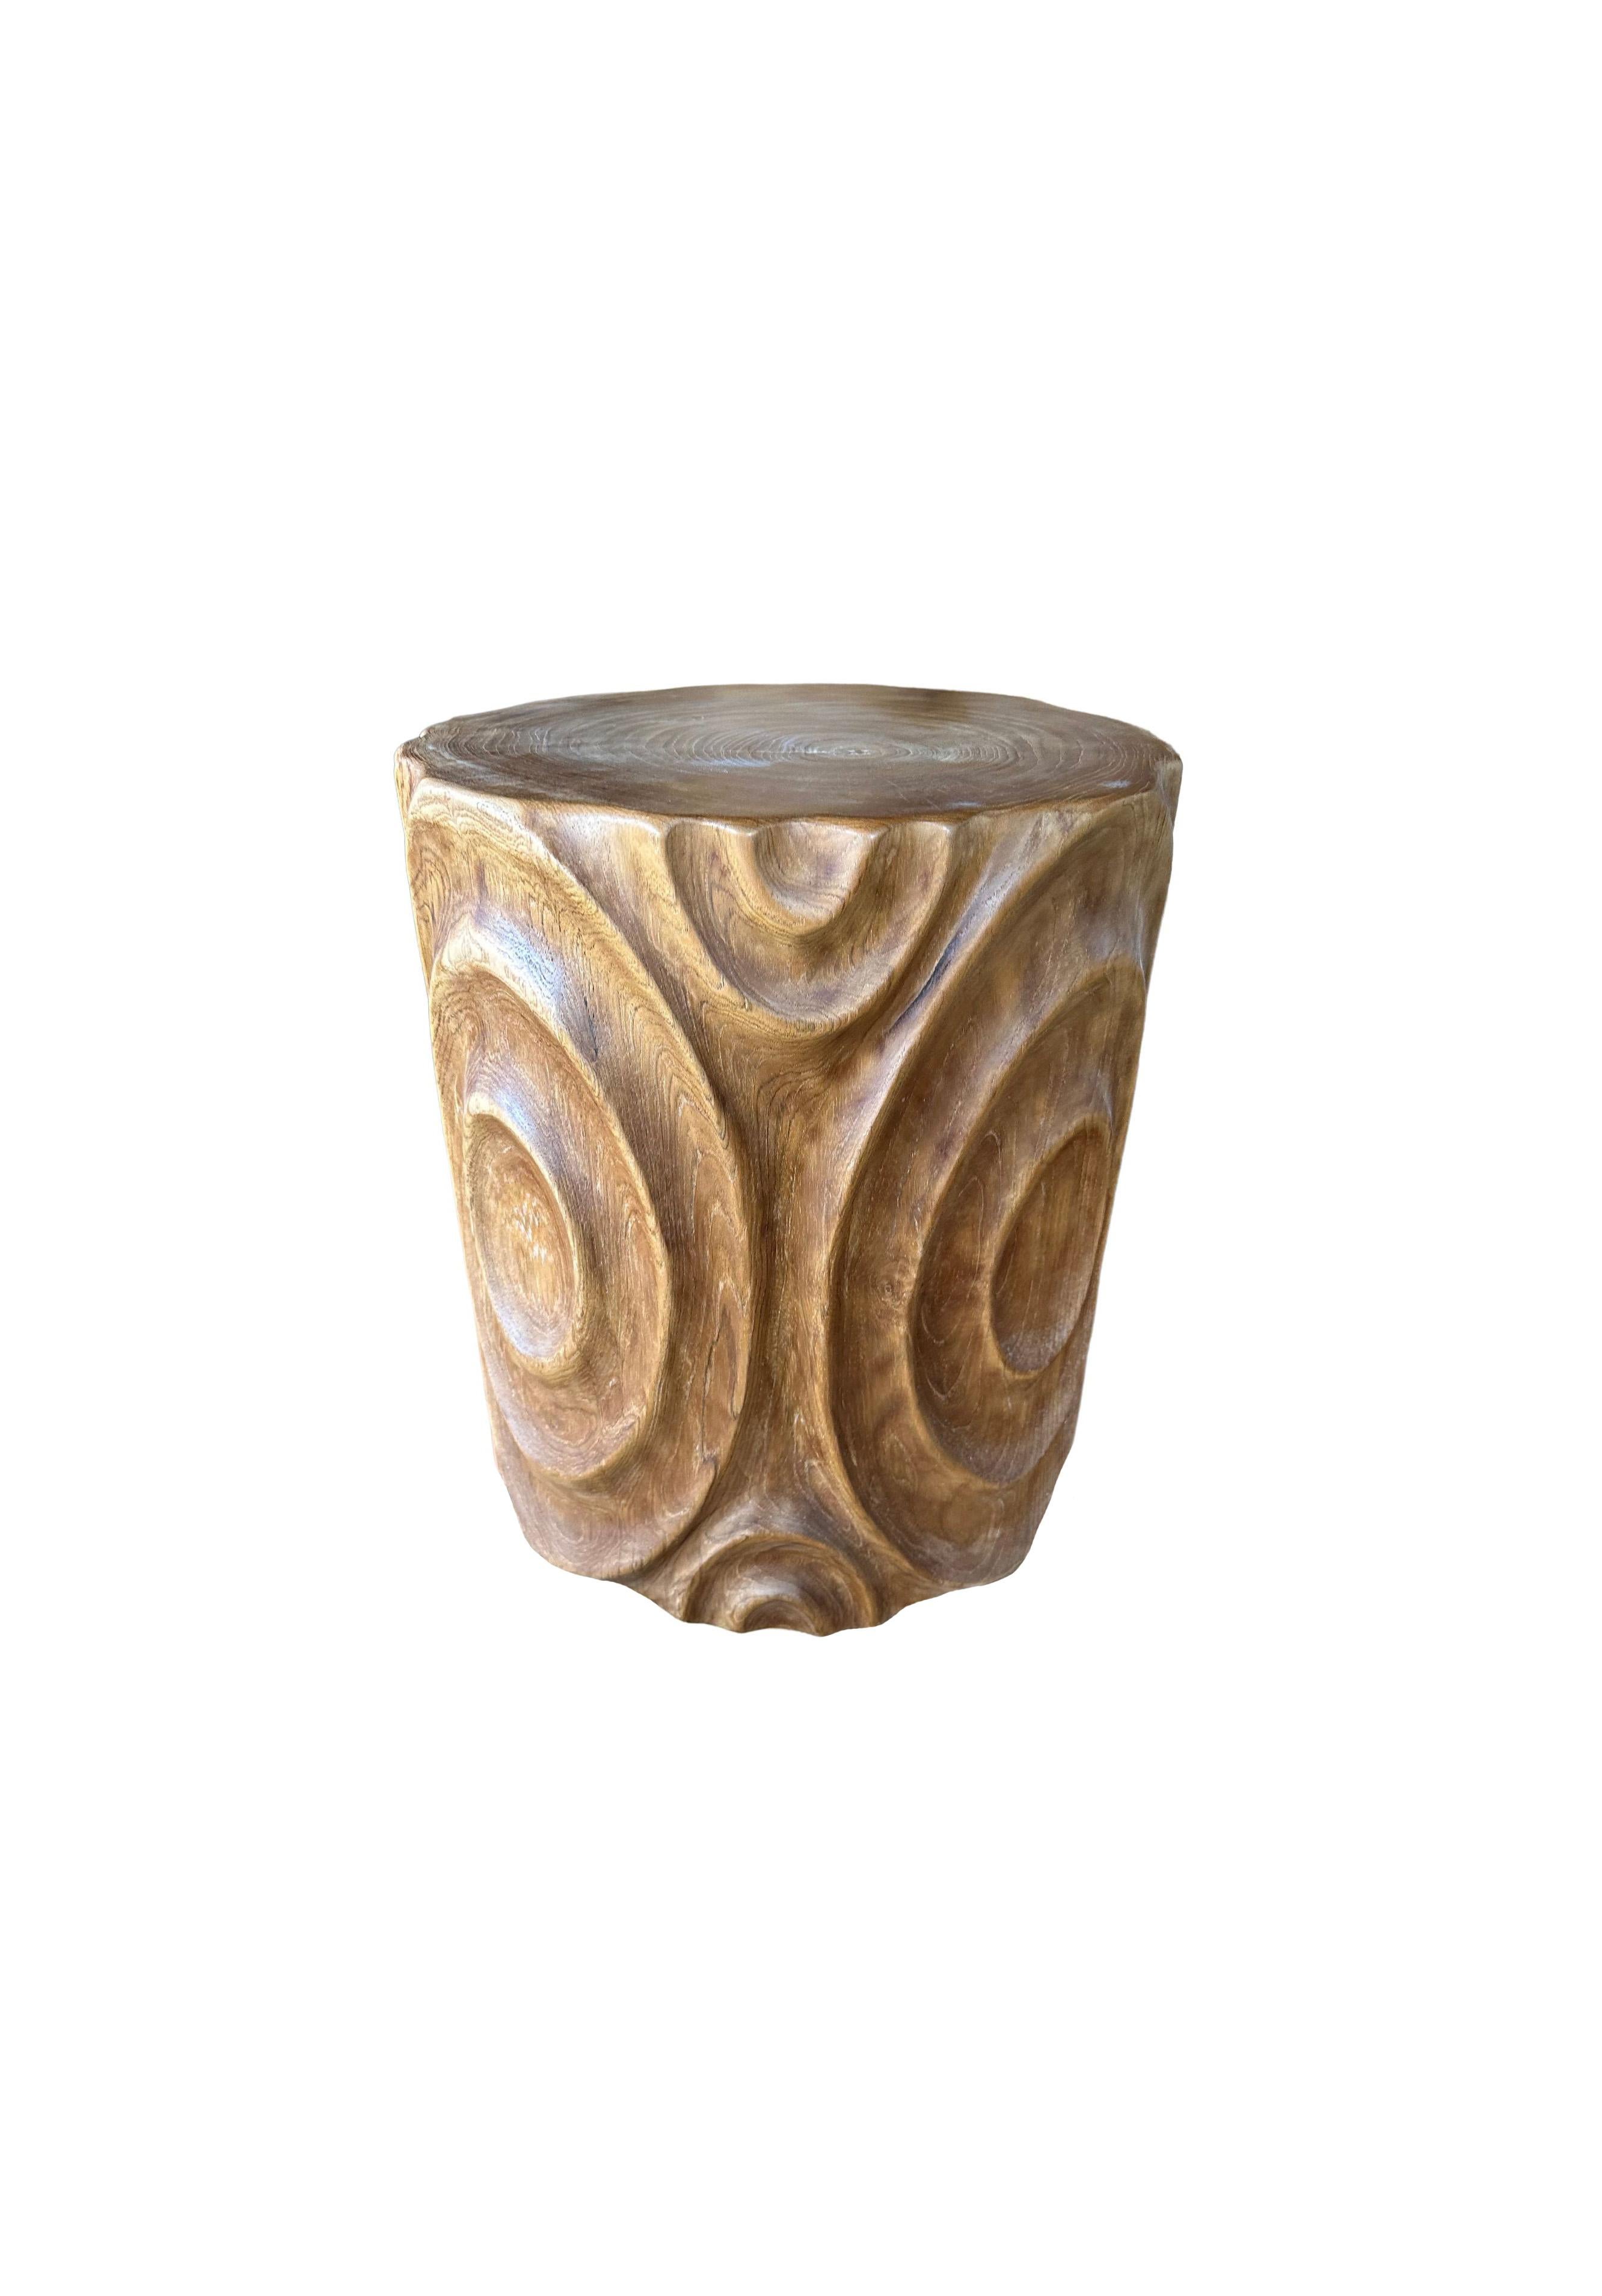 Organic Modern Solid Teak Wood Side Table with Stunning Textures, Modern Organic For Sale